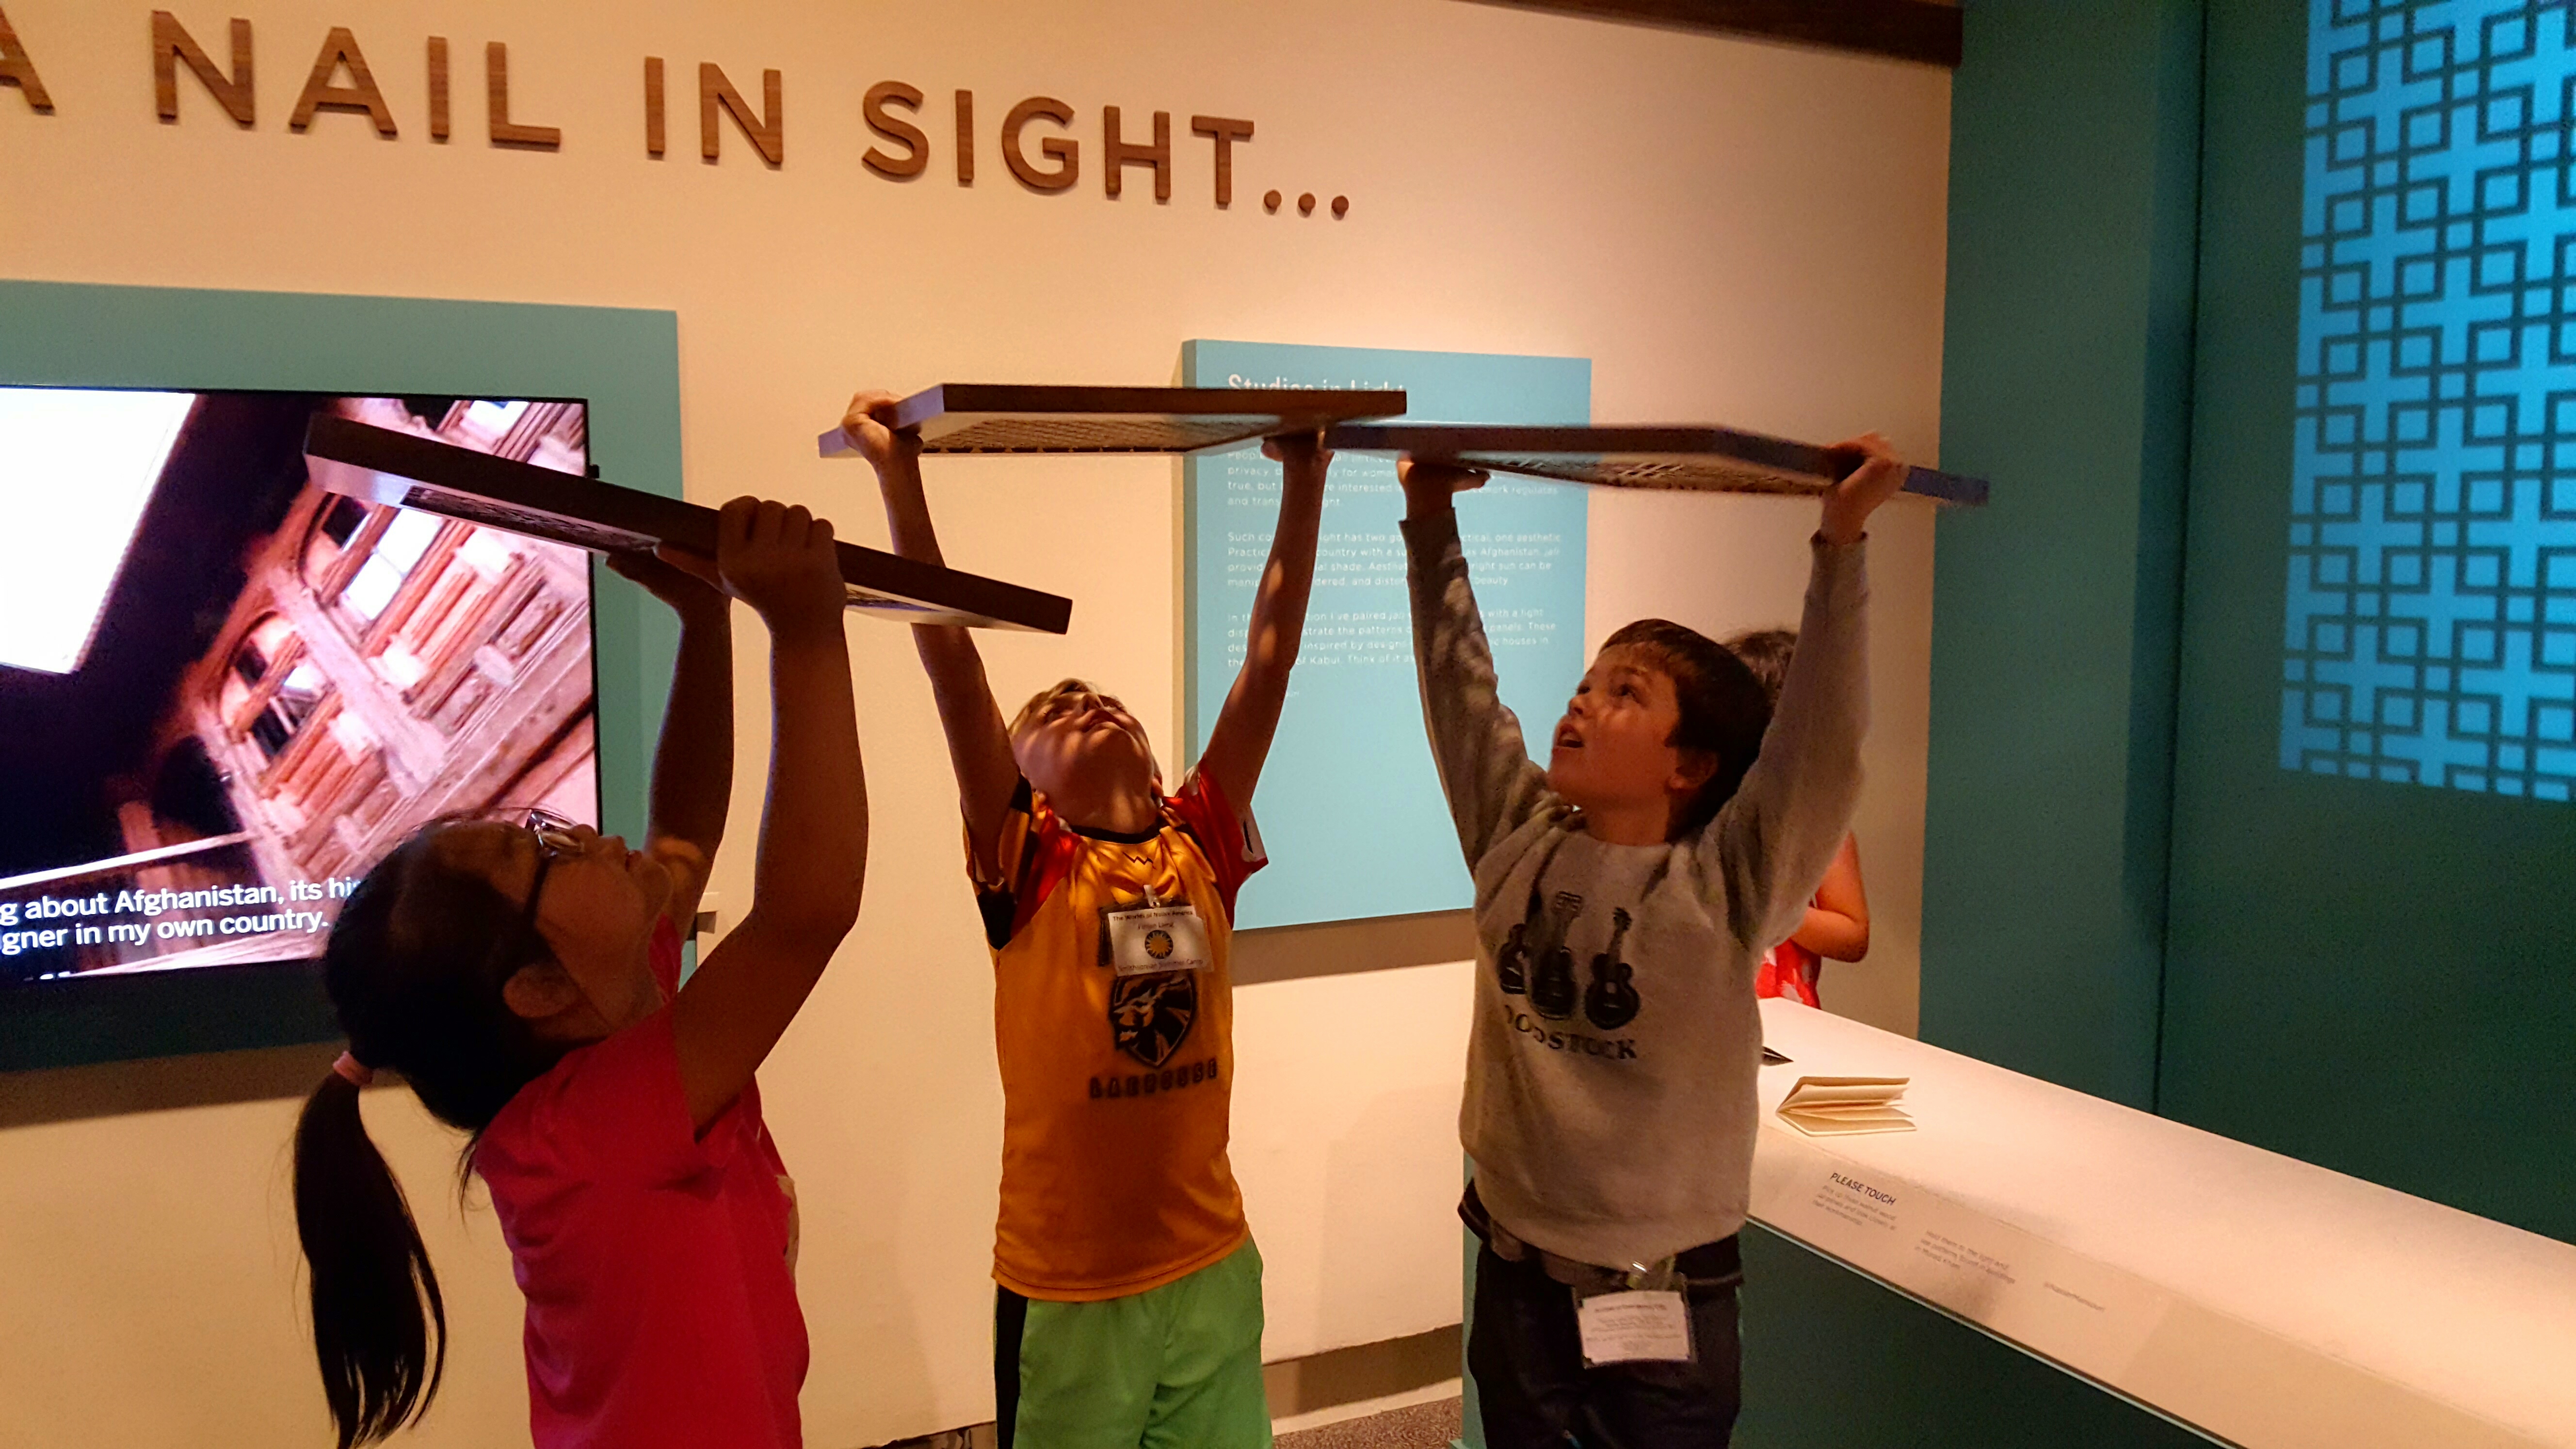 Children looking up at the ceiling through exhibit interactives inside a museum.